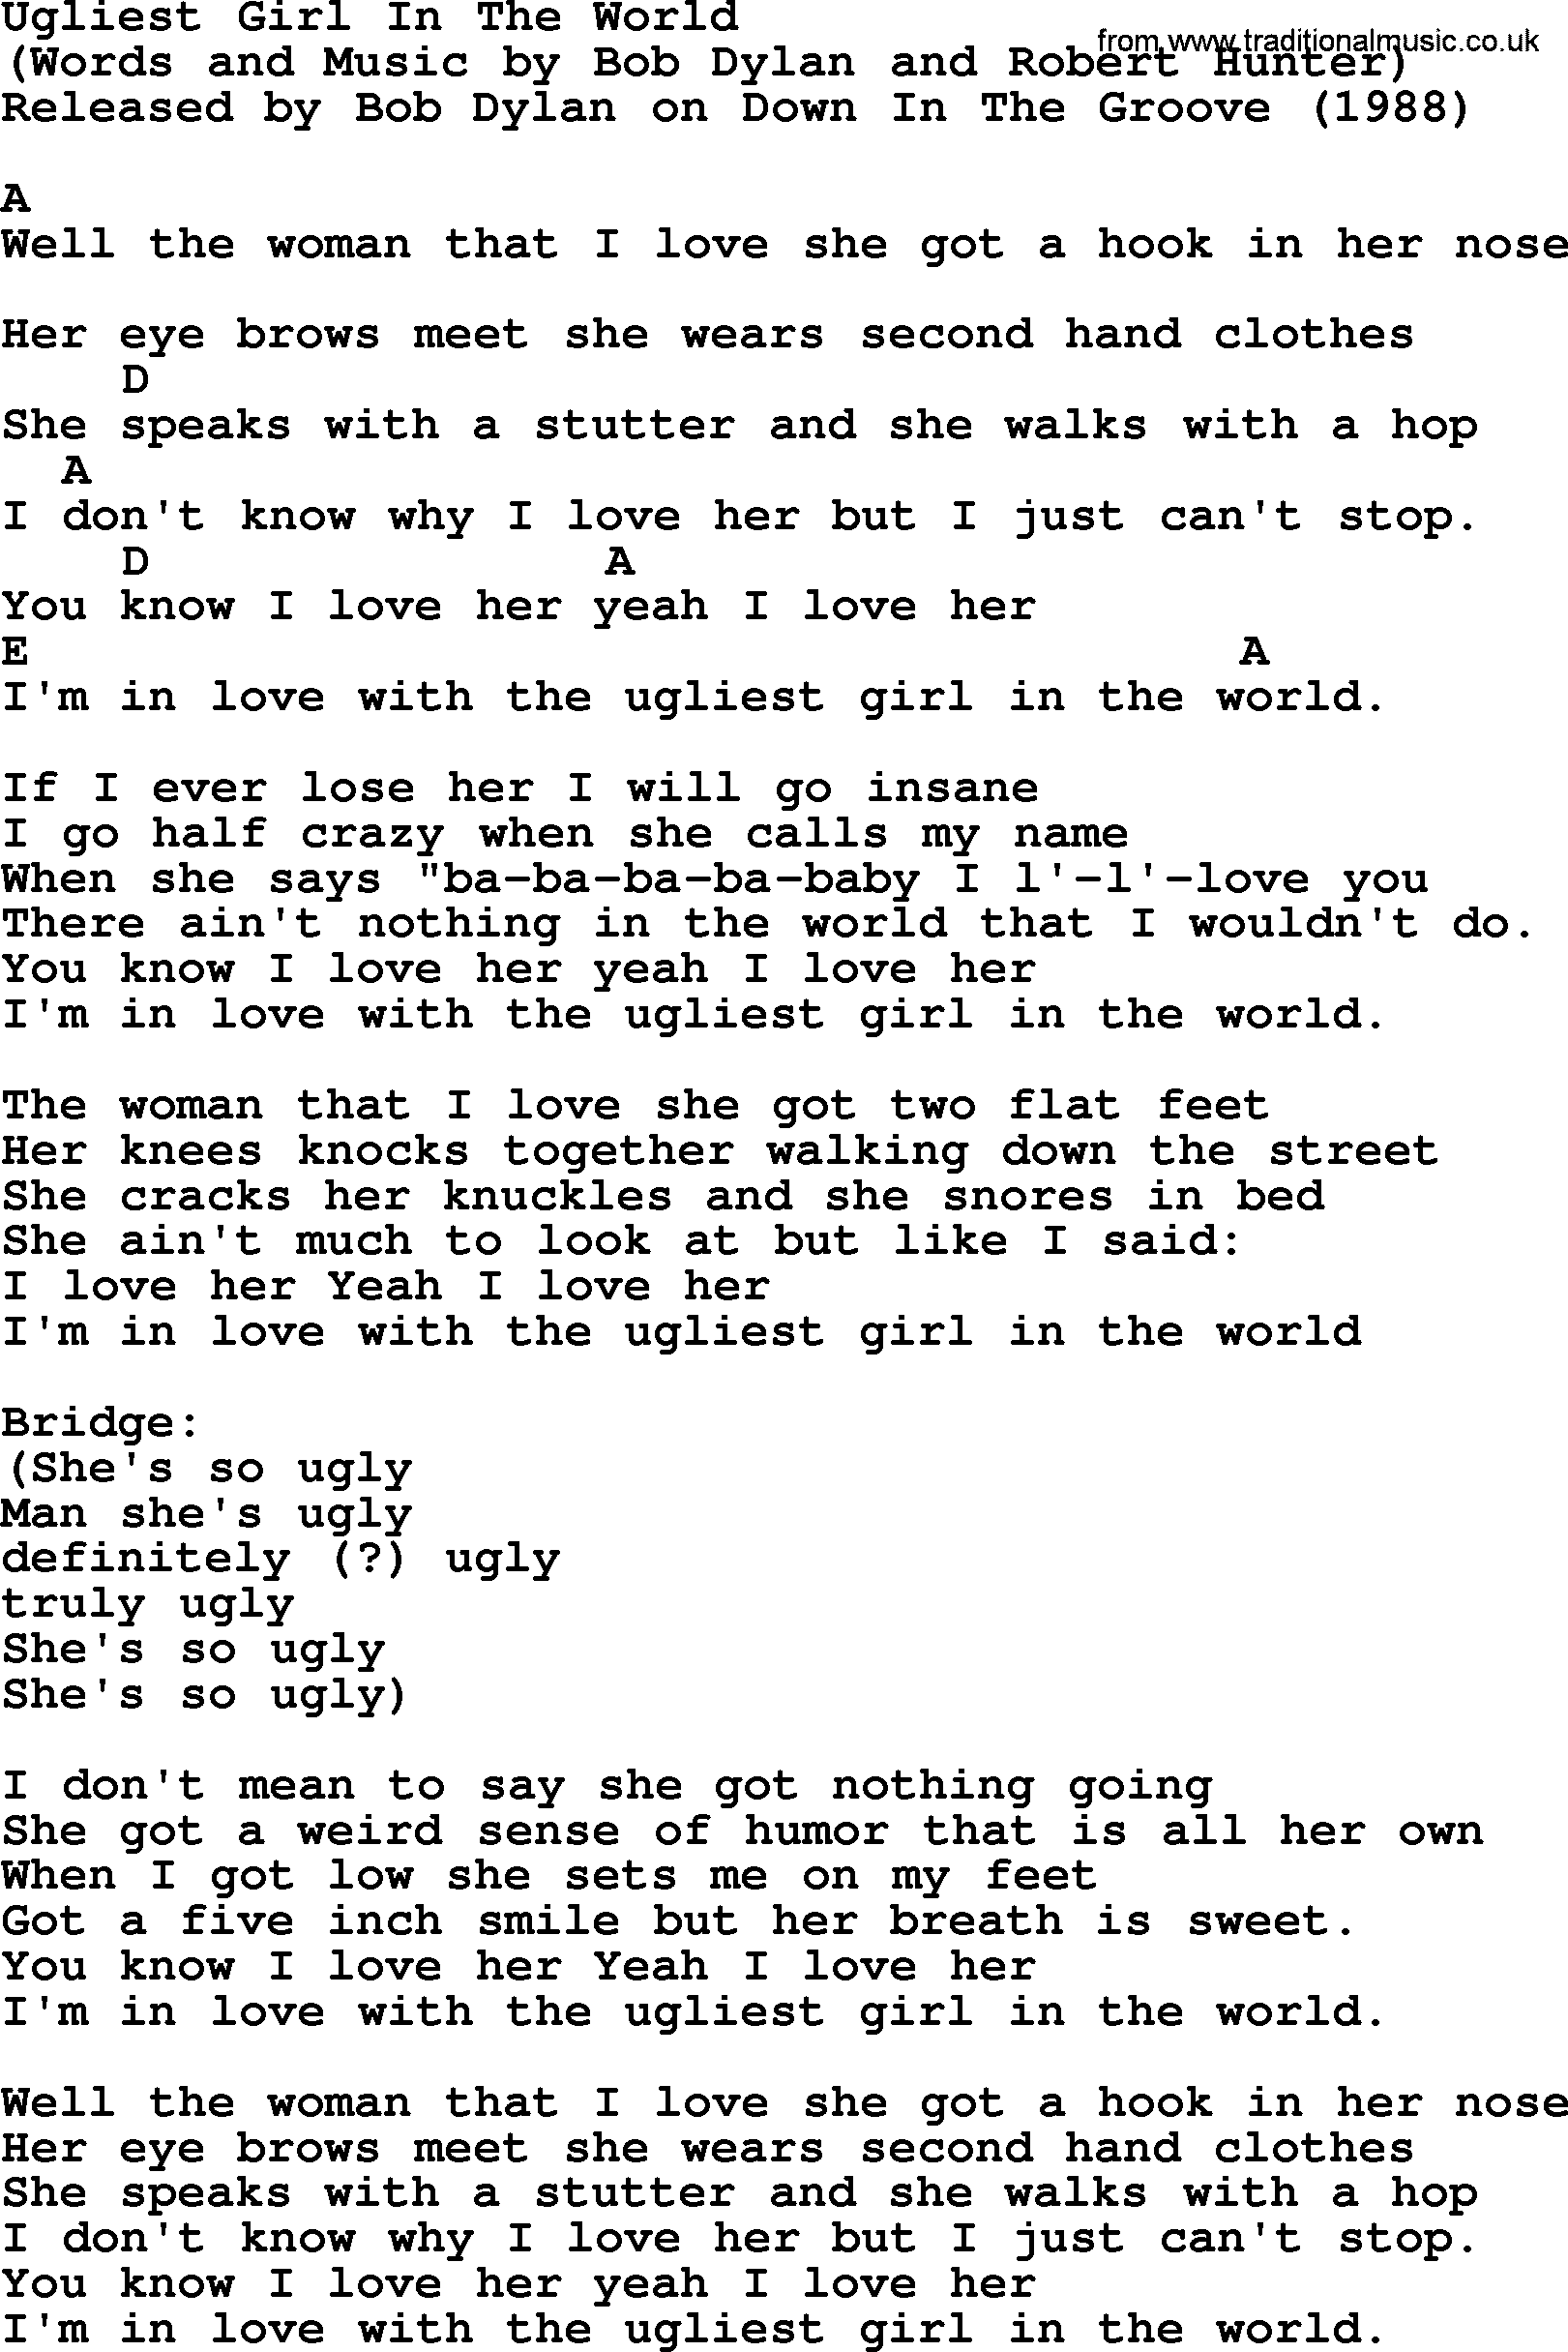 Bob Dylan song, lyrics with chords - Ugliest Girl In The World